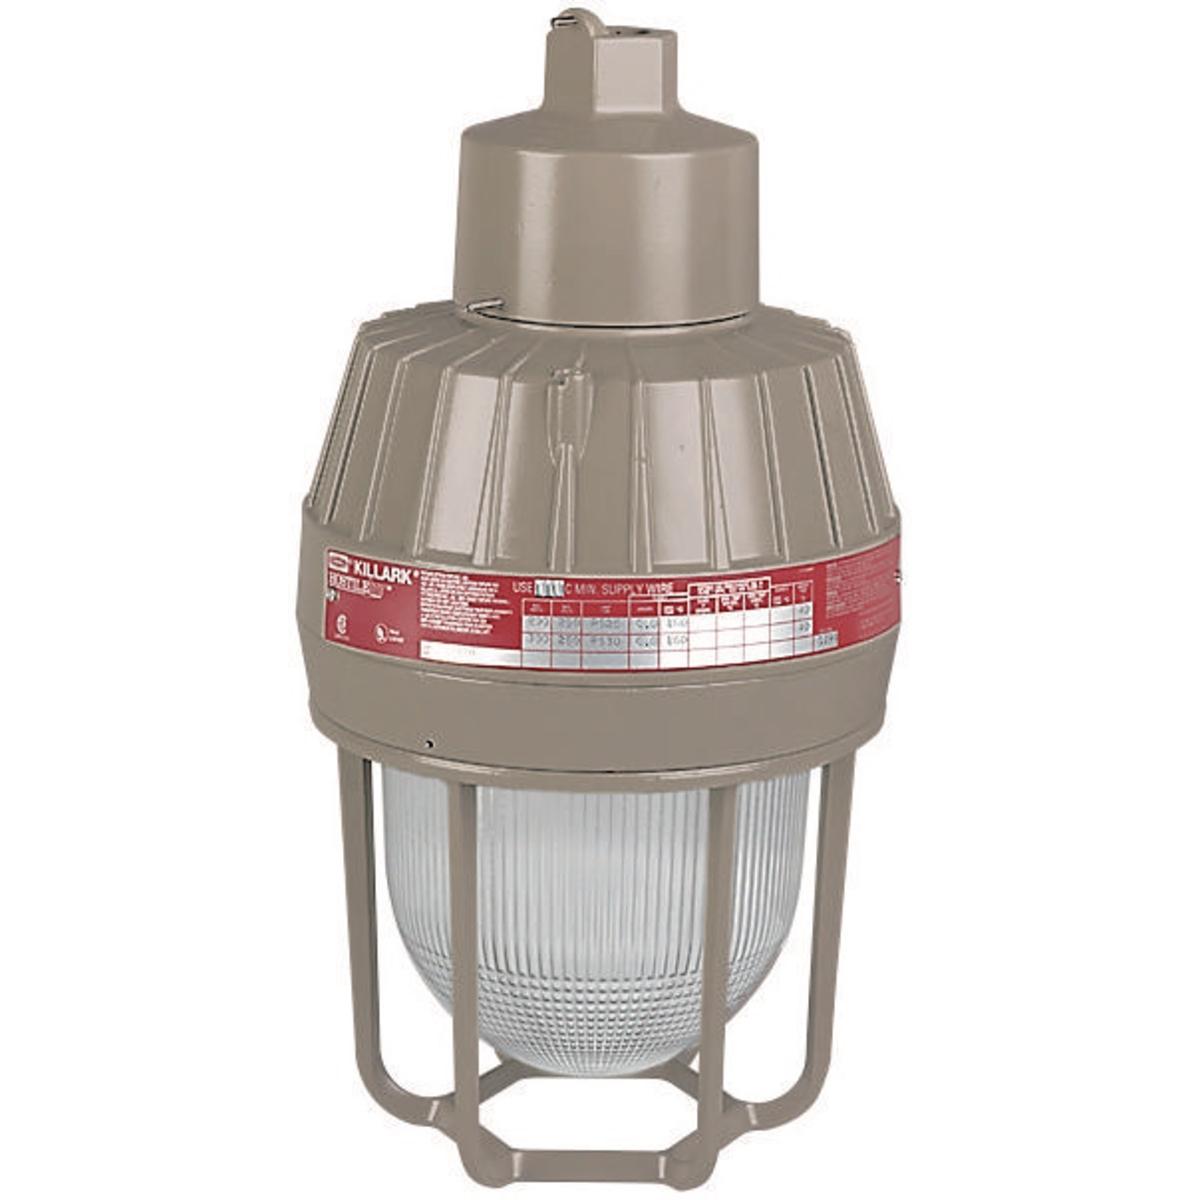 Hubbell EMS105A3 EM HID 100W 480V HPS 1" Pendant  ; Four light sources—Incandescent, compact fluorescent, high pressure sodium and metal halide ; Mounting choice—Pendant, ceiling, 25˚ stanchion or 90˚ wall mount, all with “wireless” design that allows fast, easy fixture i